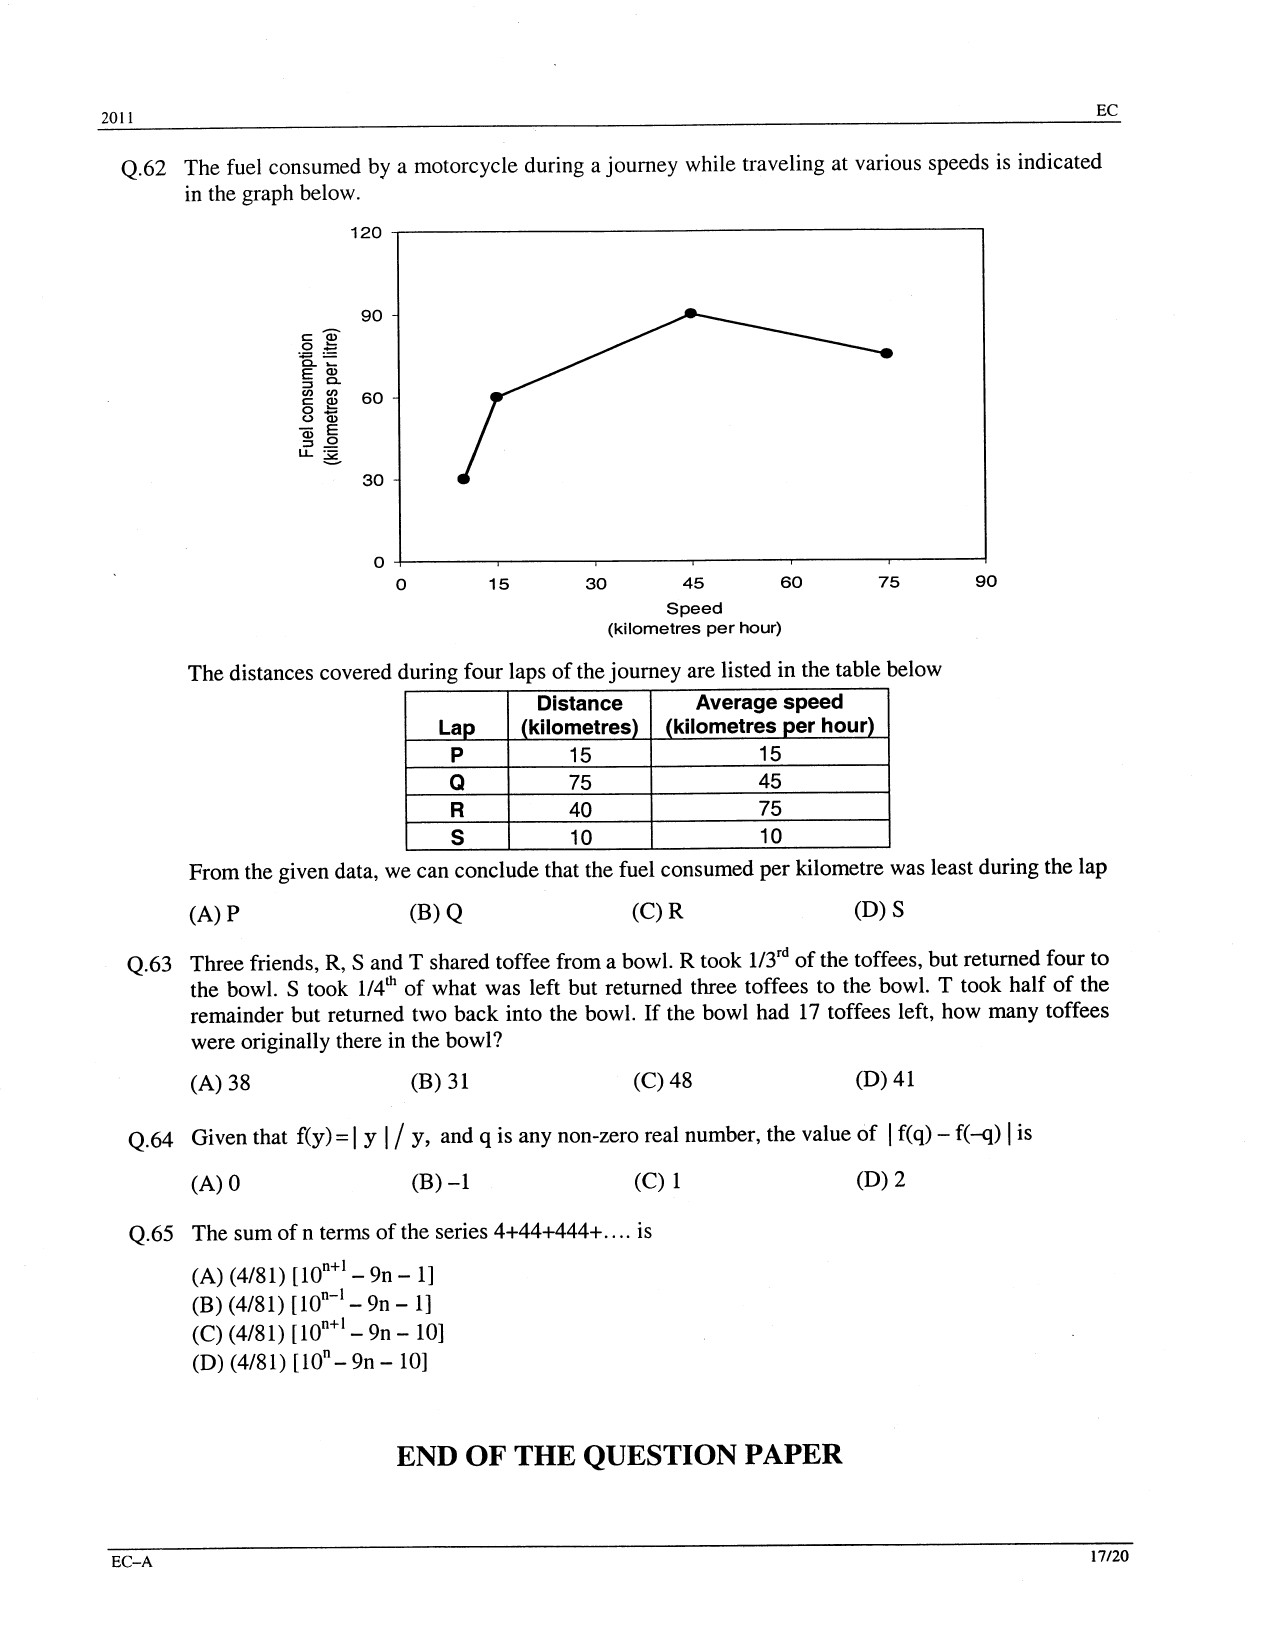 GATE Exam Question Paper 2011 Electronics and Communication Engineering 17